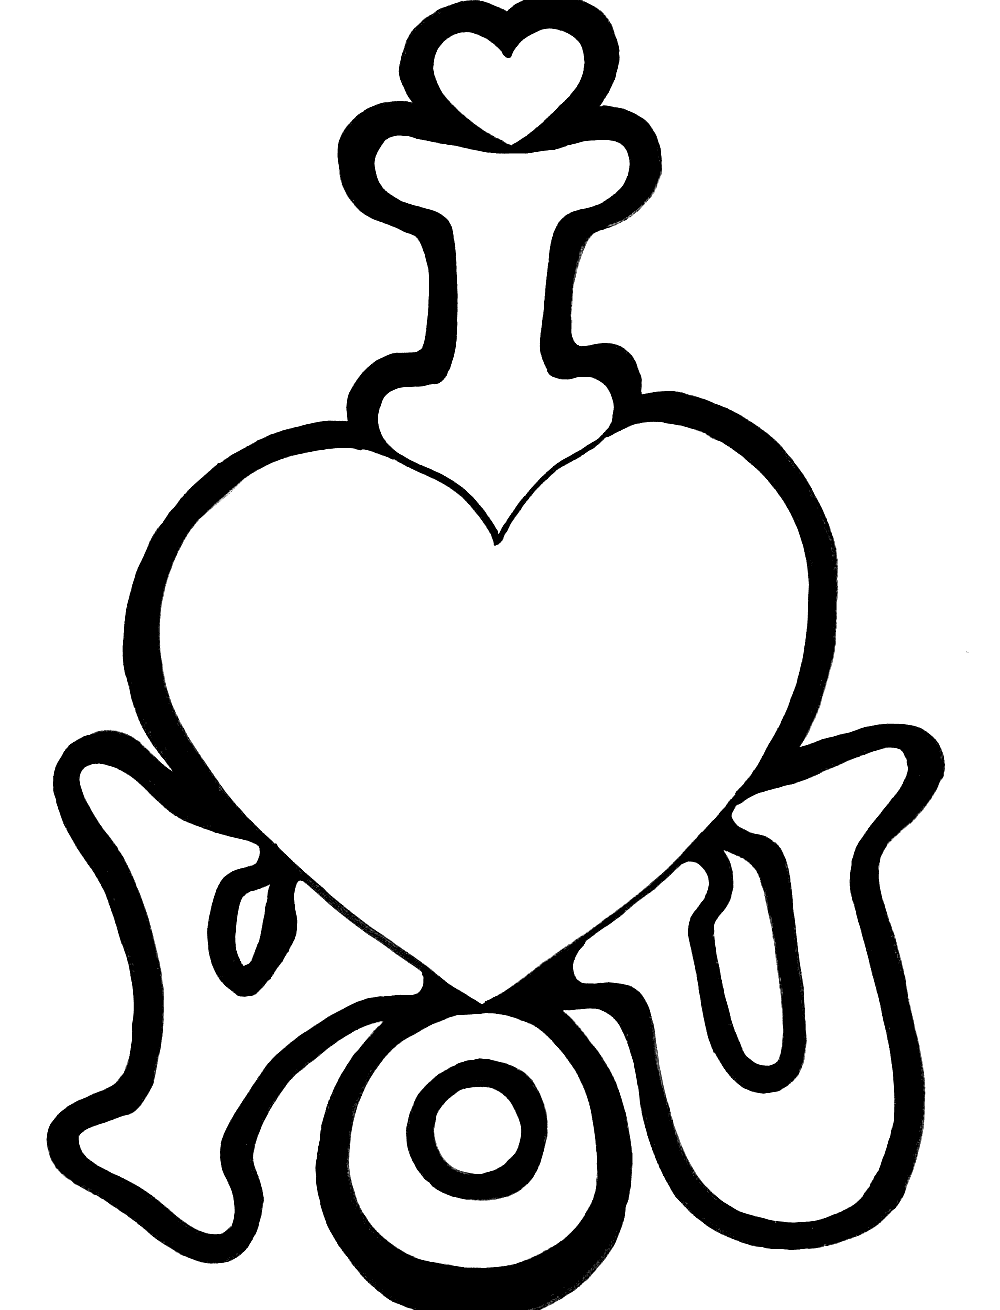 I Love You with Heart Coloring Page